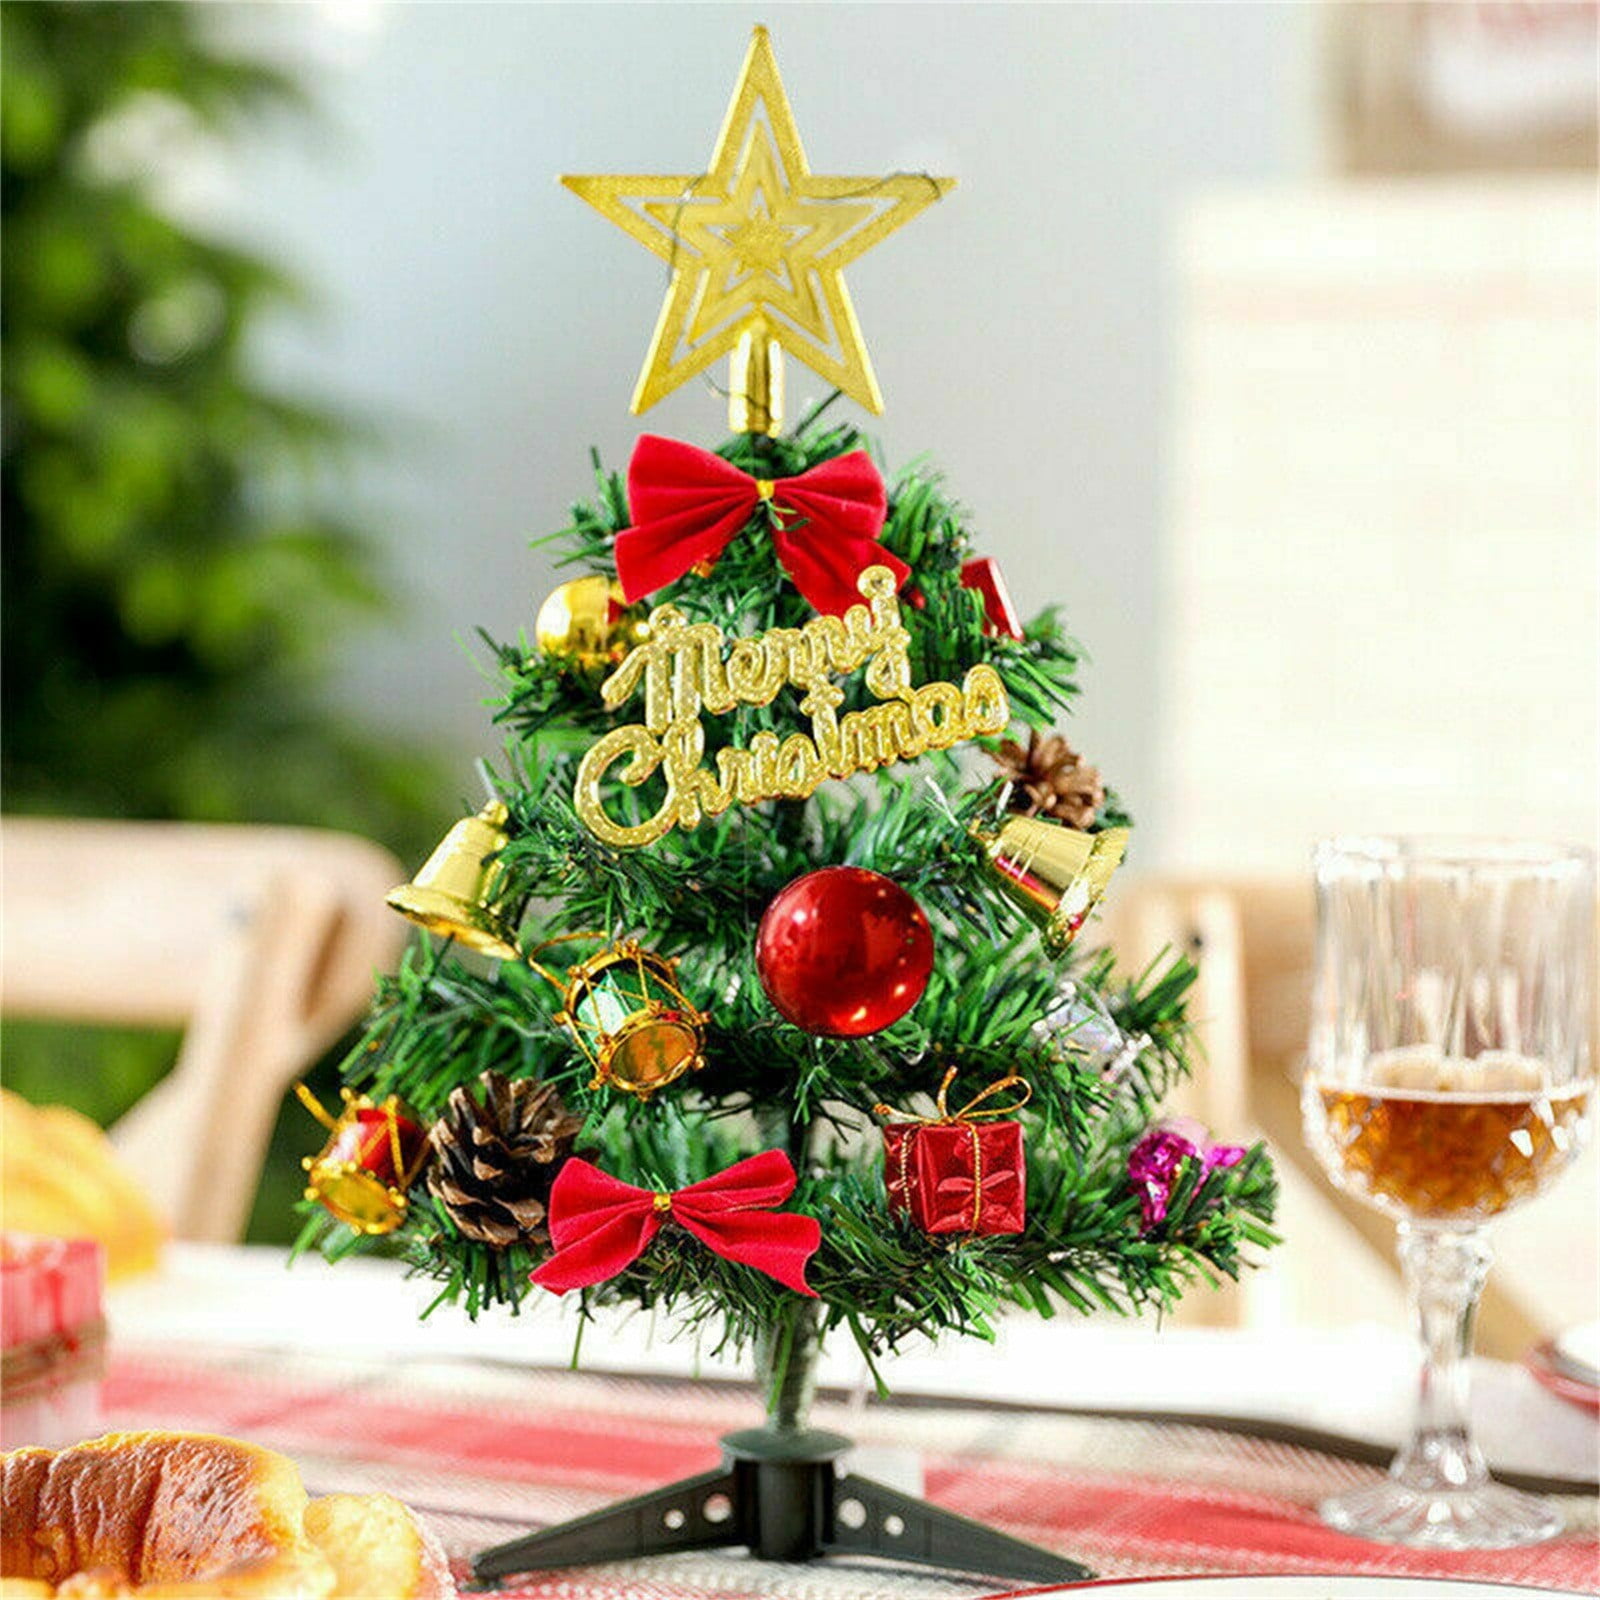 Details about   LED Artificial Small Mini Christmas Tree Tabletop Desk Christmas Tree Decor New 